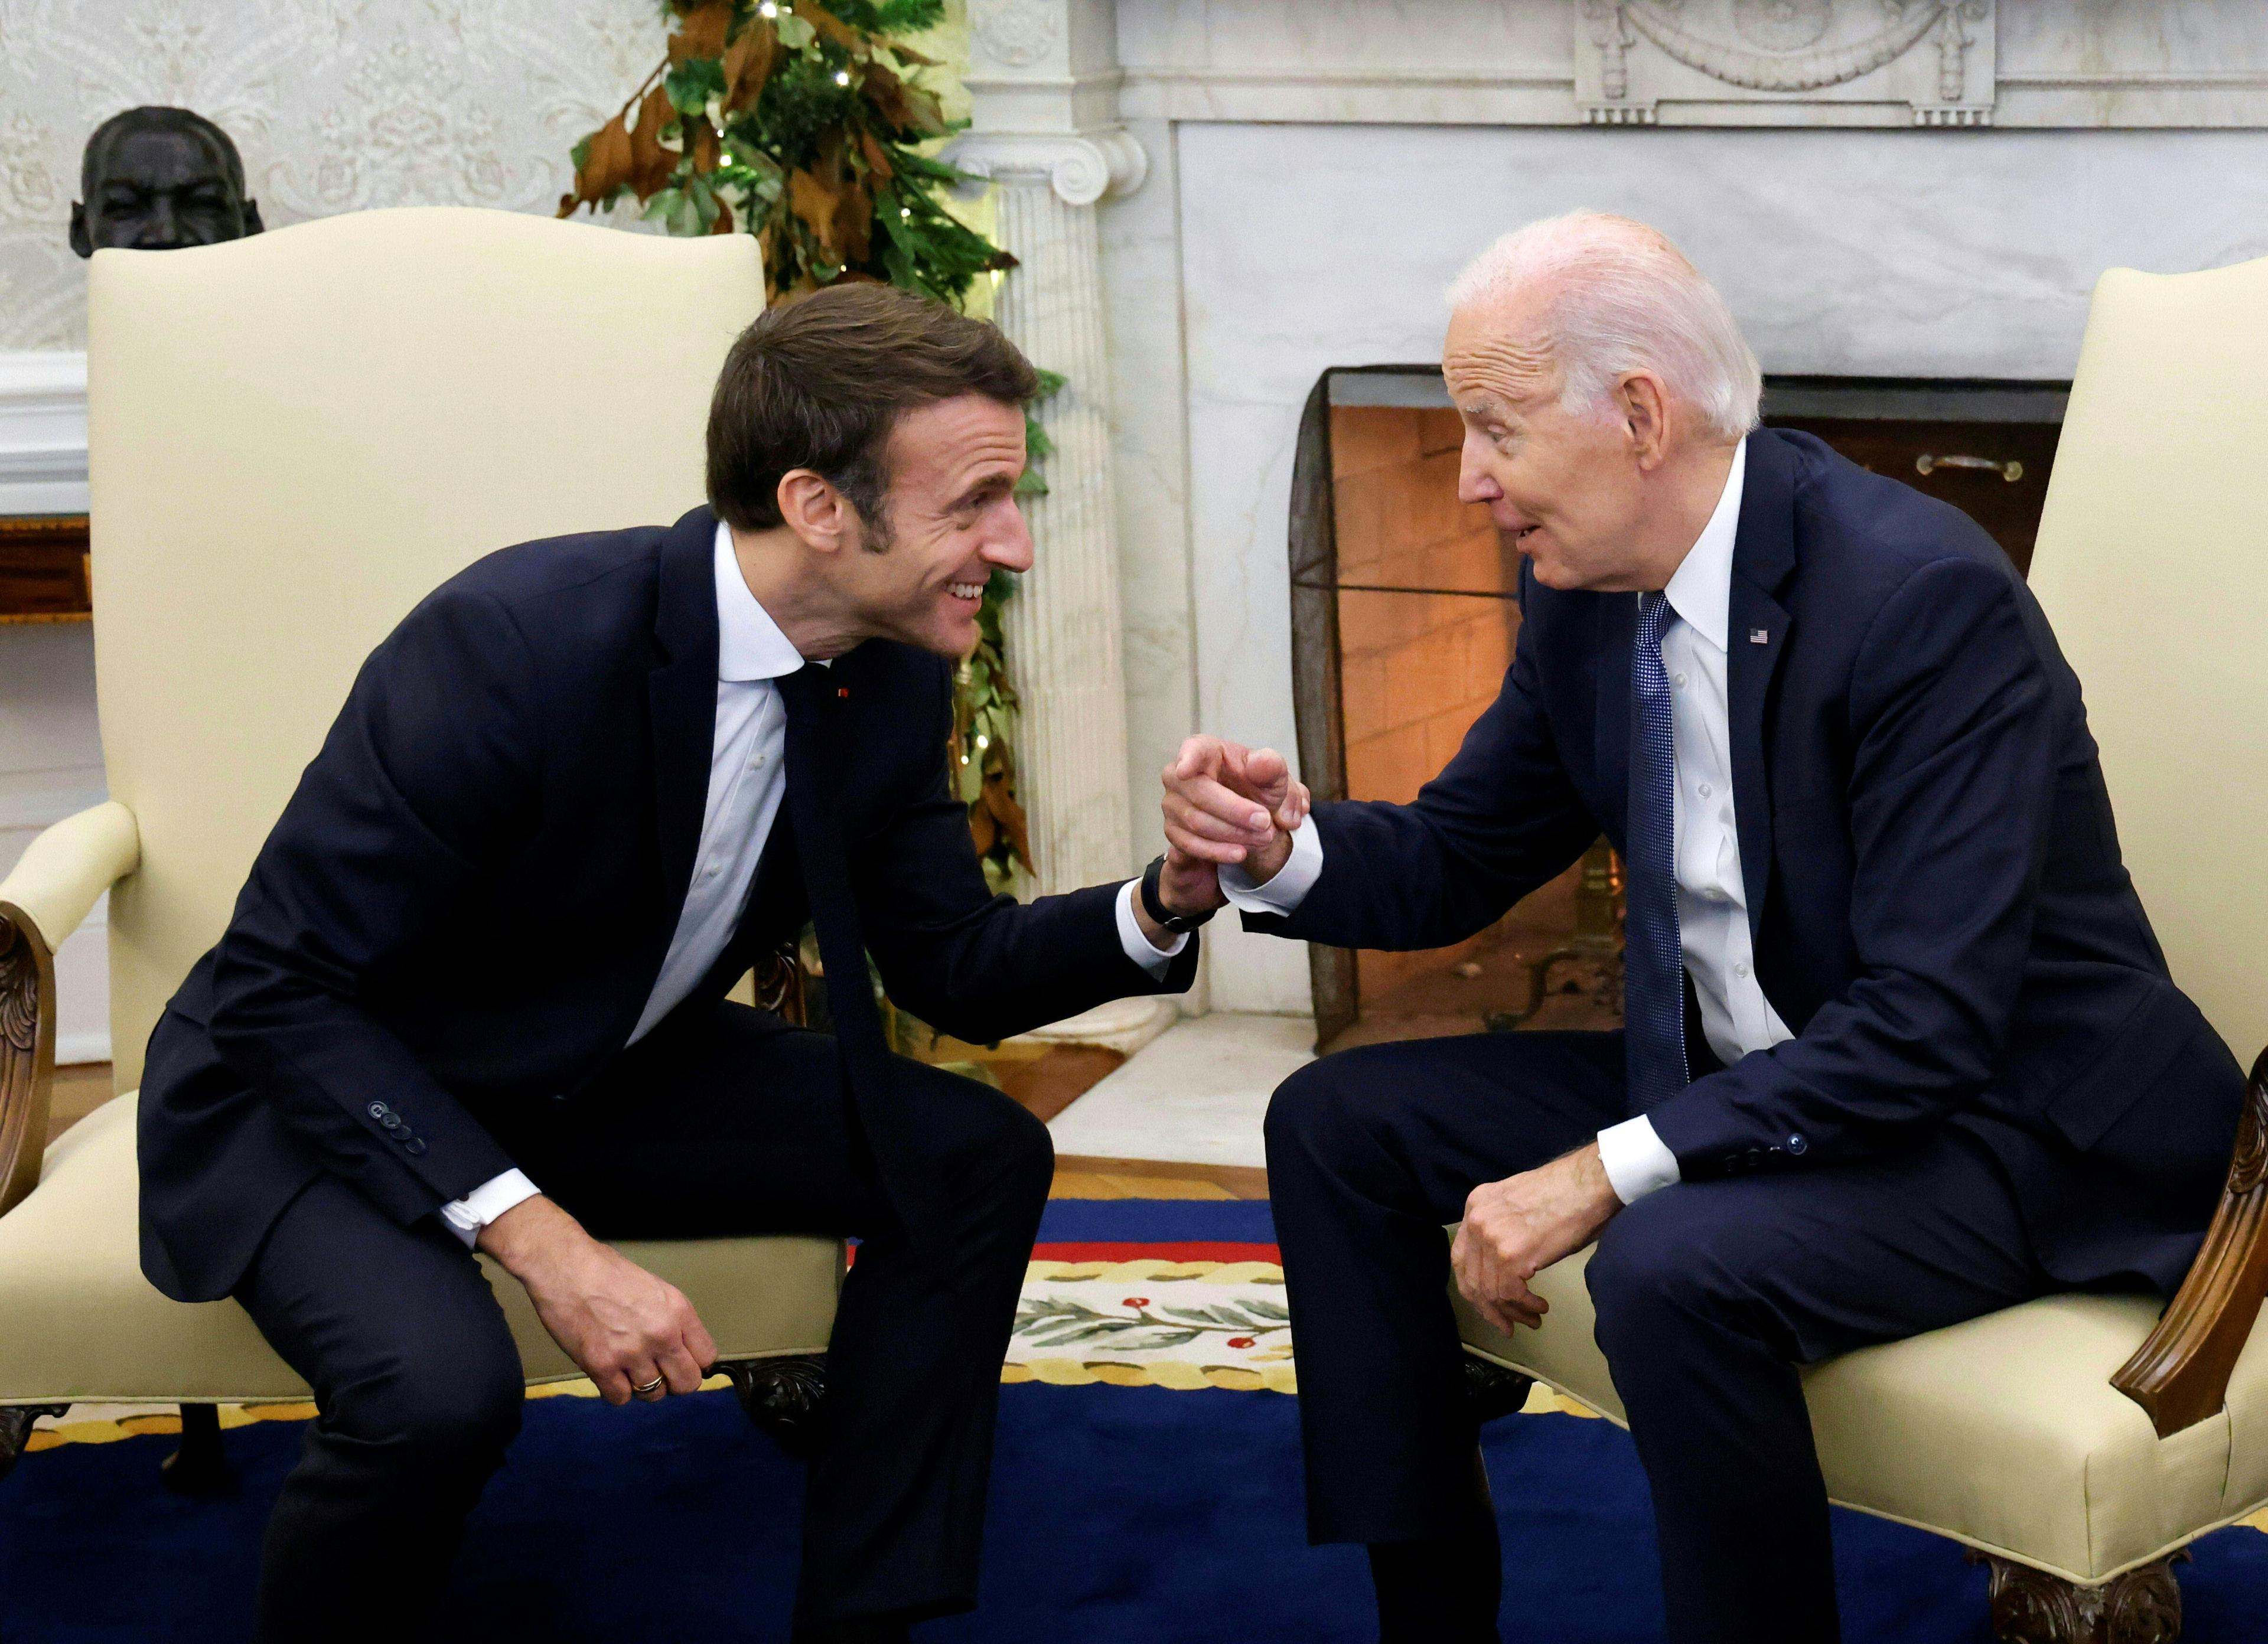 US President Joe Biden (R) meets with French President Emmanuel Macron in the Oval Office of the White House in Washington, DC, on December 1, 2022. (Photo by Ludovic MARIN / AFP)